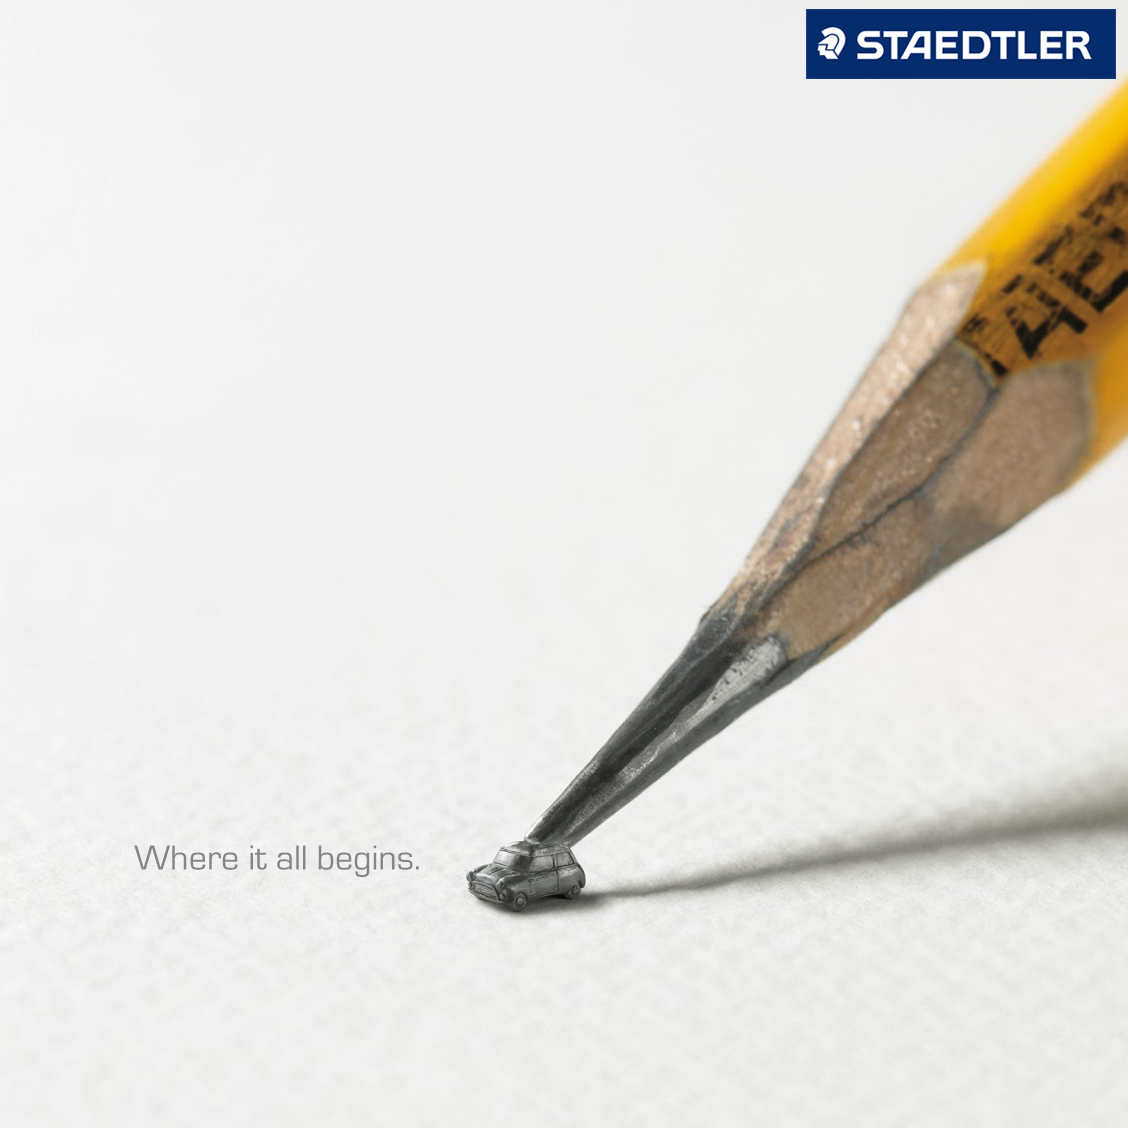 Designed by pencil